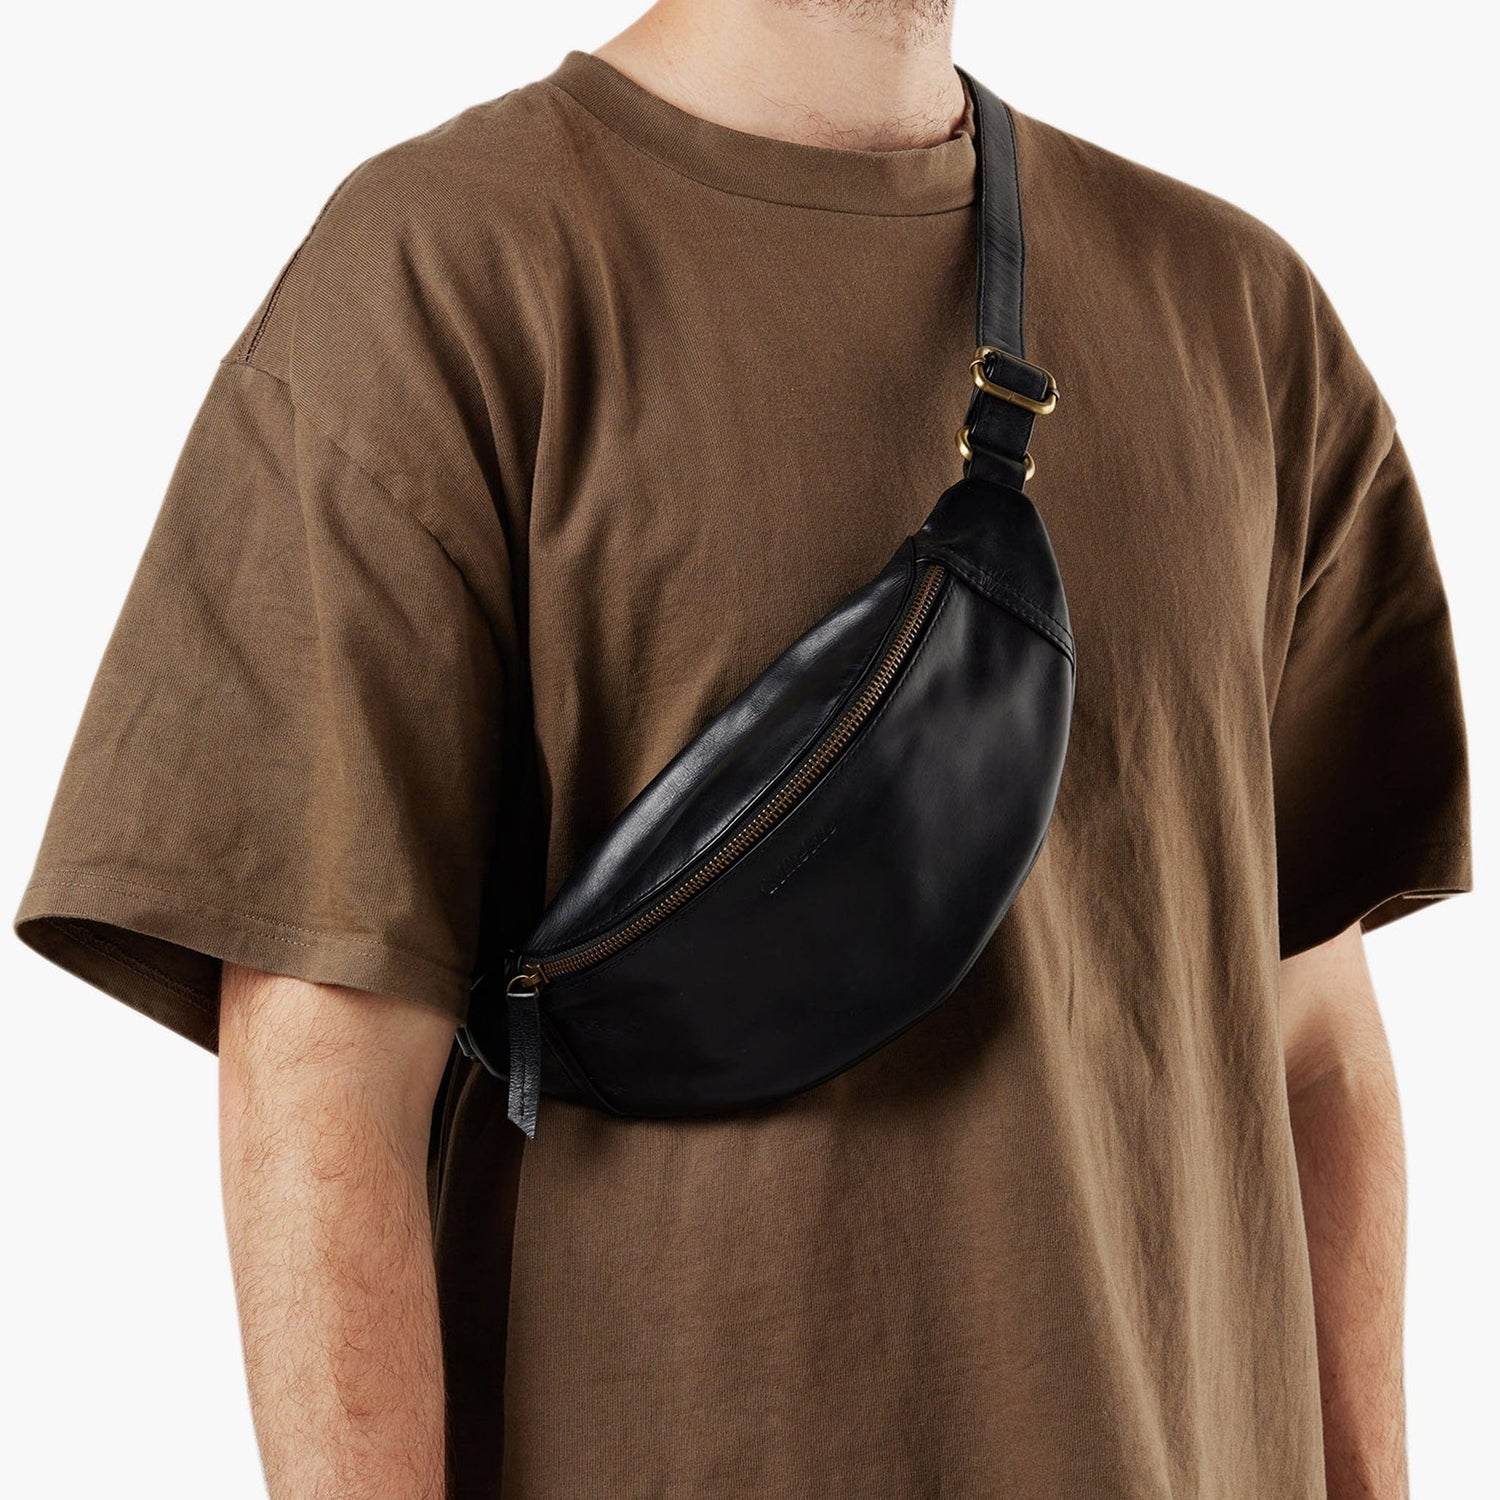 Men's Unisex Leather Bumbag by Duffle&Co